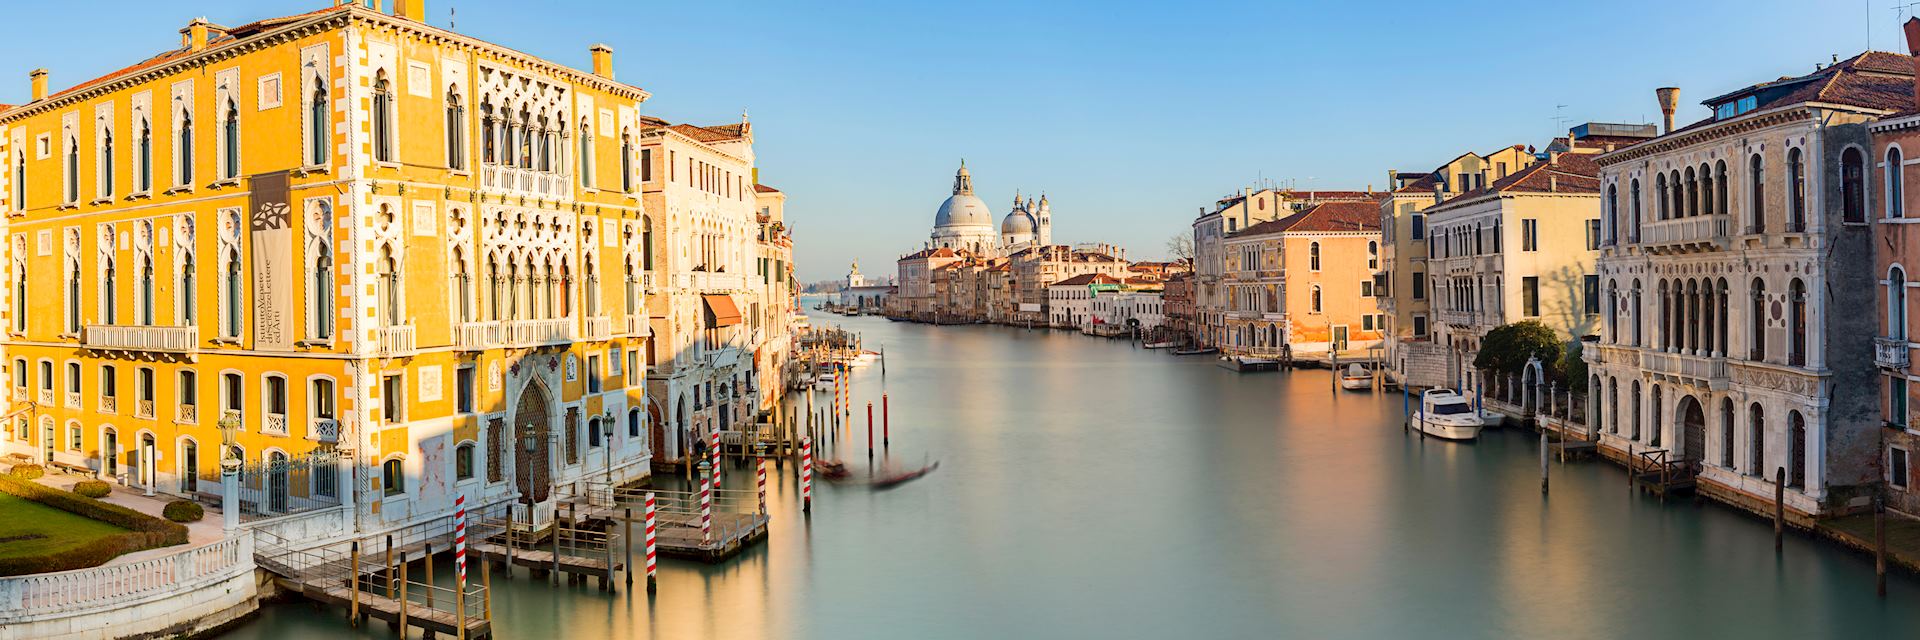 View from Accademia Bridge on Grand Canal, Venice